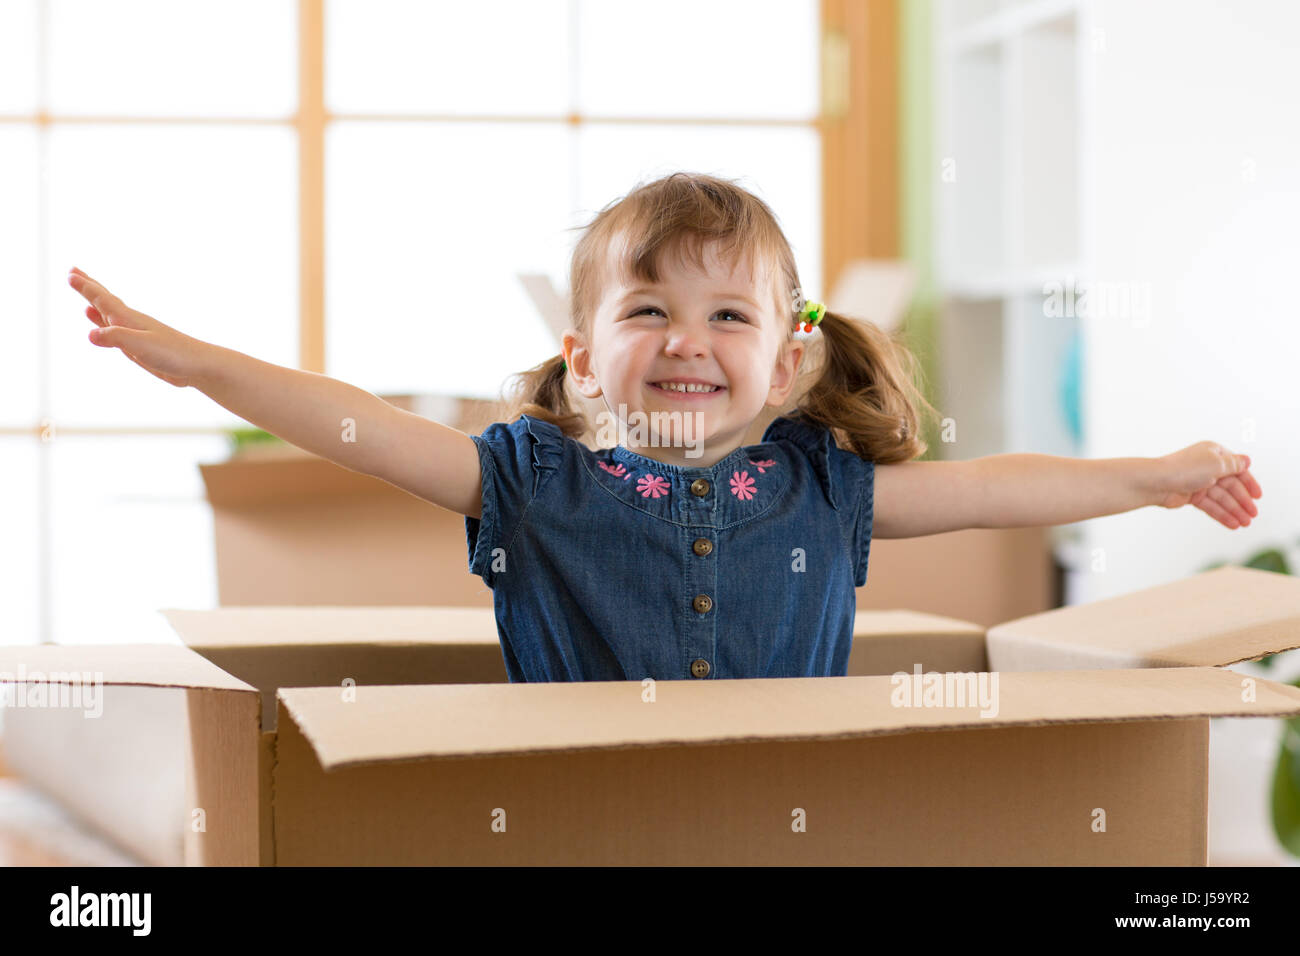 Laughing child girl sitting inside cardboard boxe in her new home Stock Photo